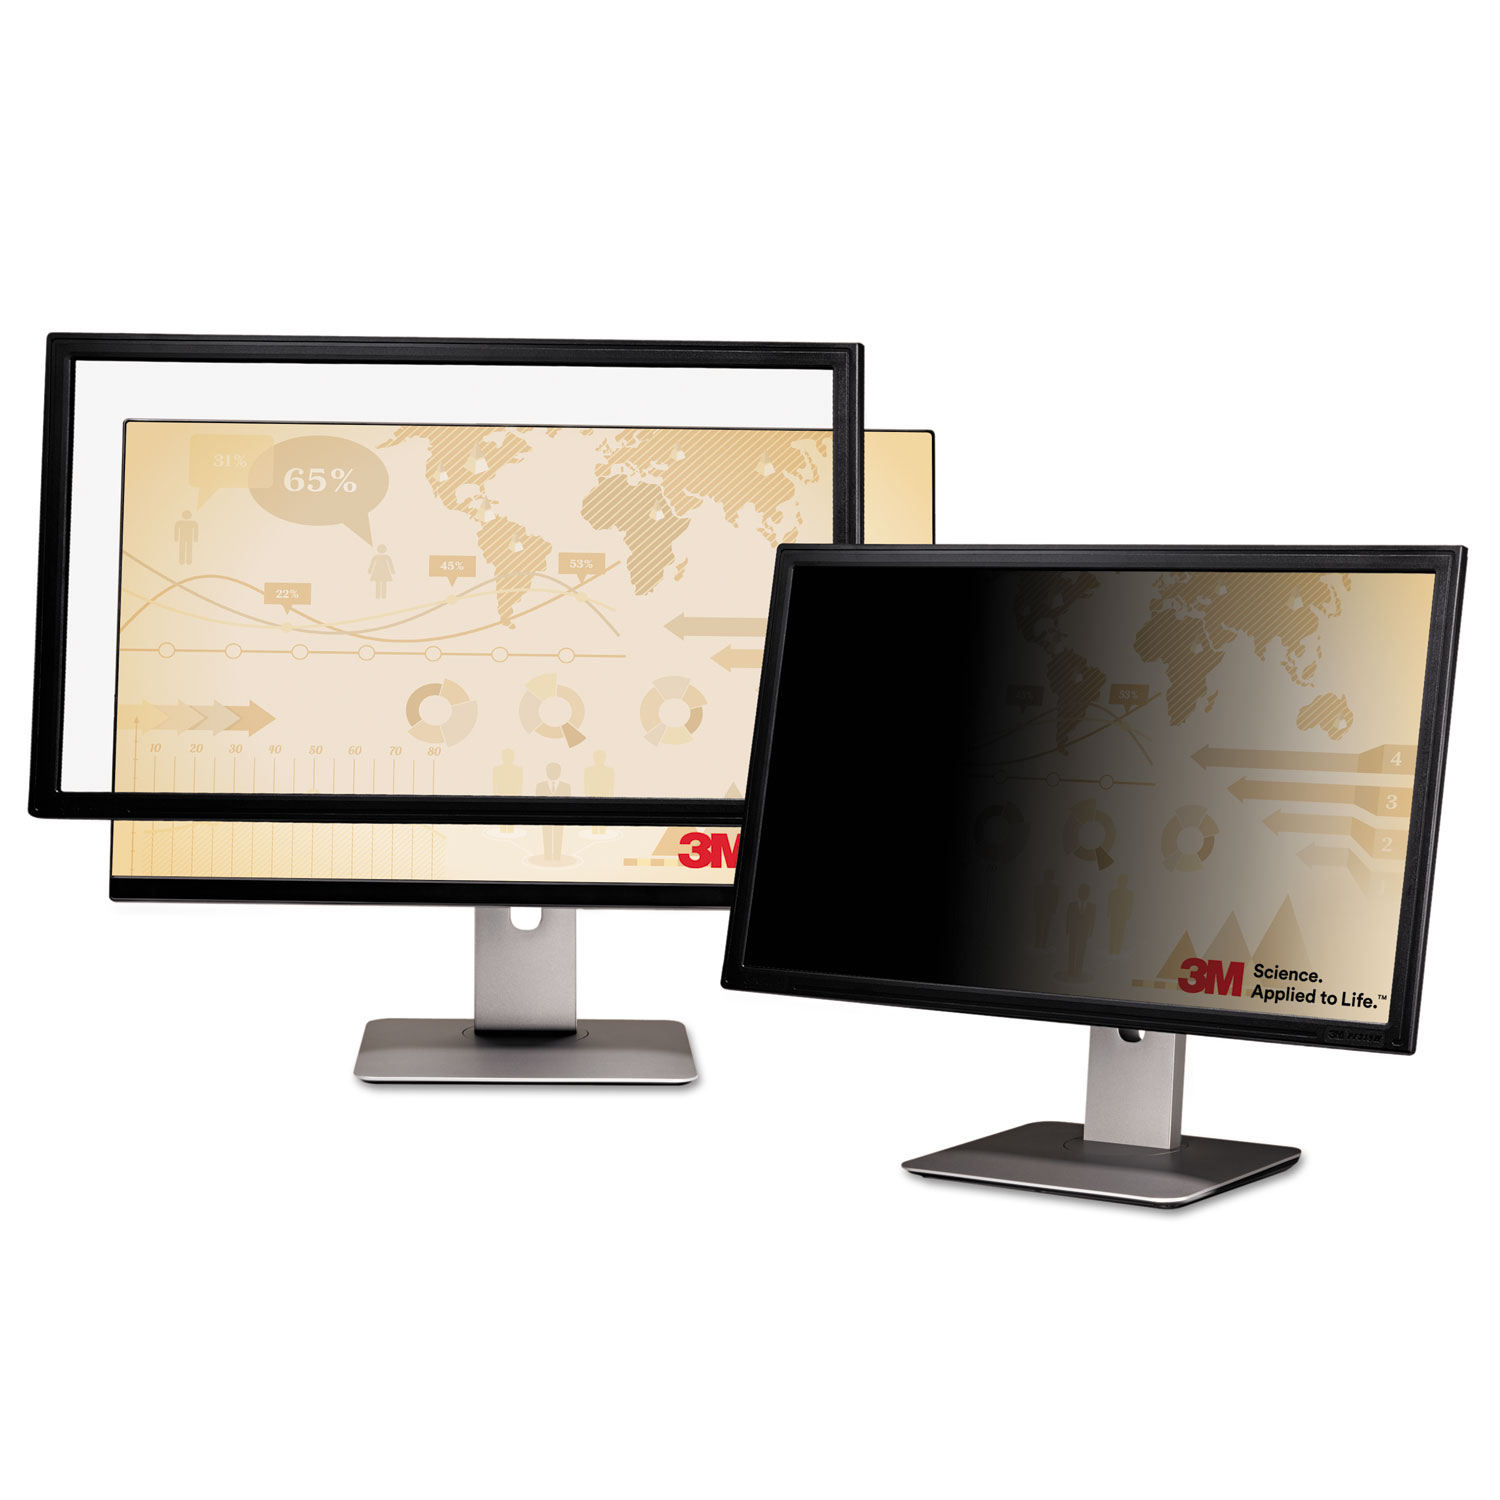 3M, MMMPF213C3B, Privacy Filter for 21.3 in Monitors 4:3 PF213C3B, Black,Glossy,Matte - image 1 of 3